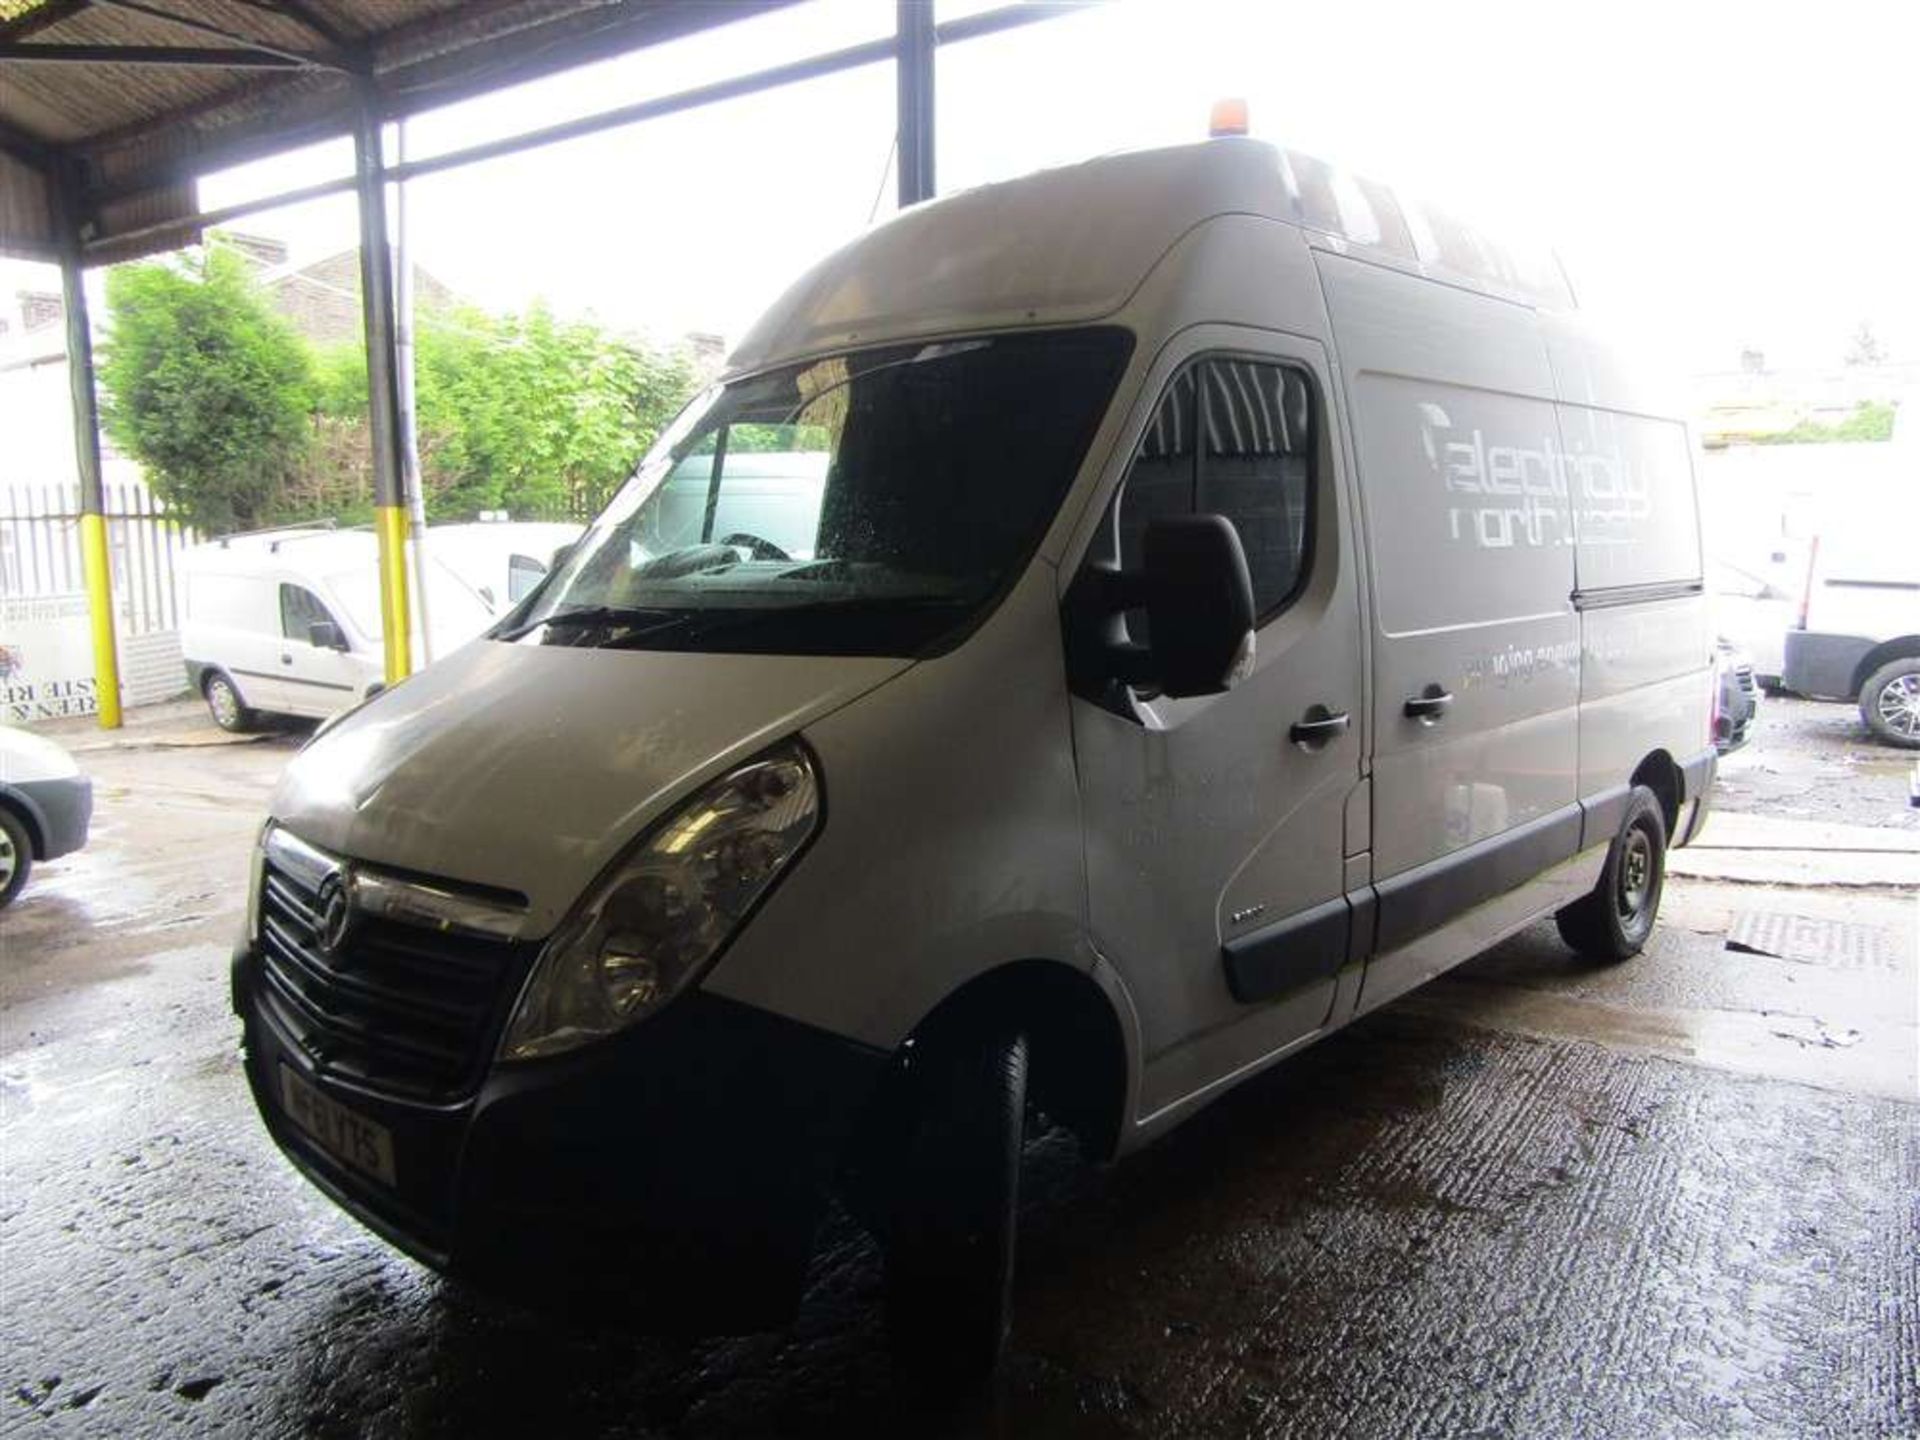 2011 61 reg Vauxhall Movano F3500 L2H3 (Non Runner) (Direct Electricity North West) - Image 2 of 6